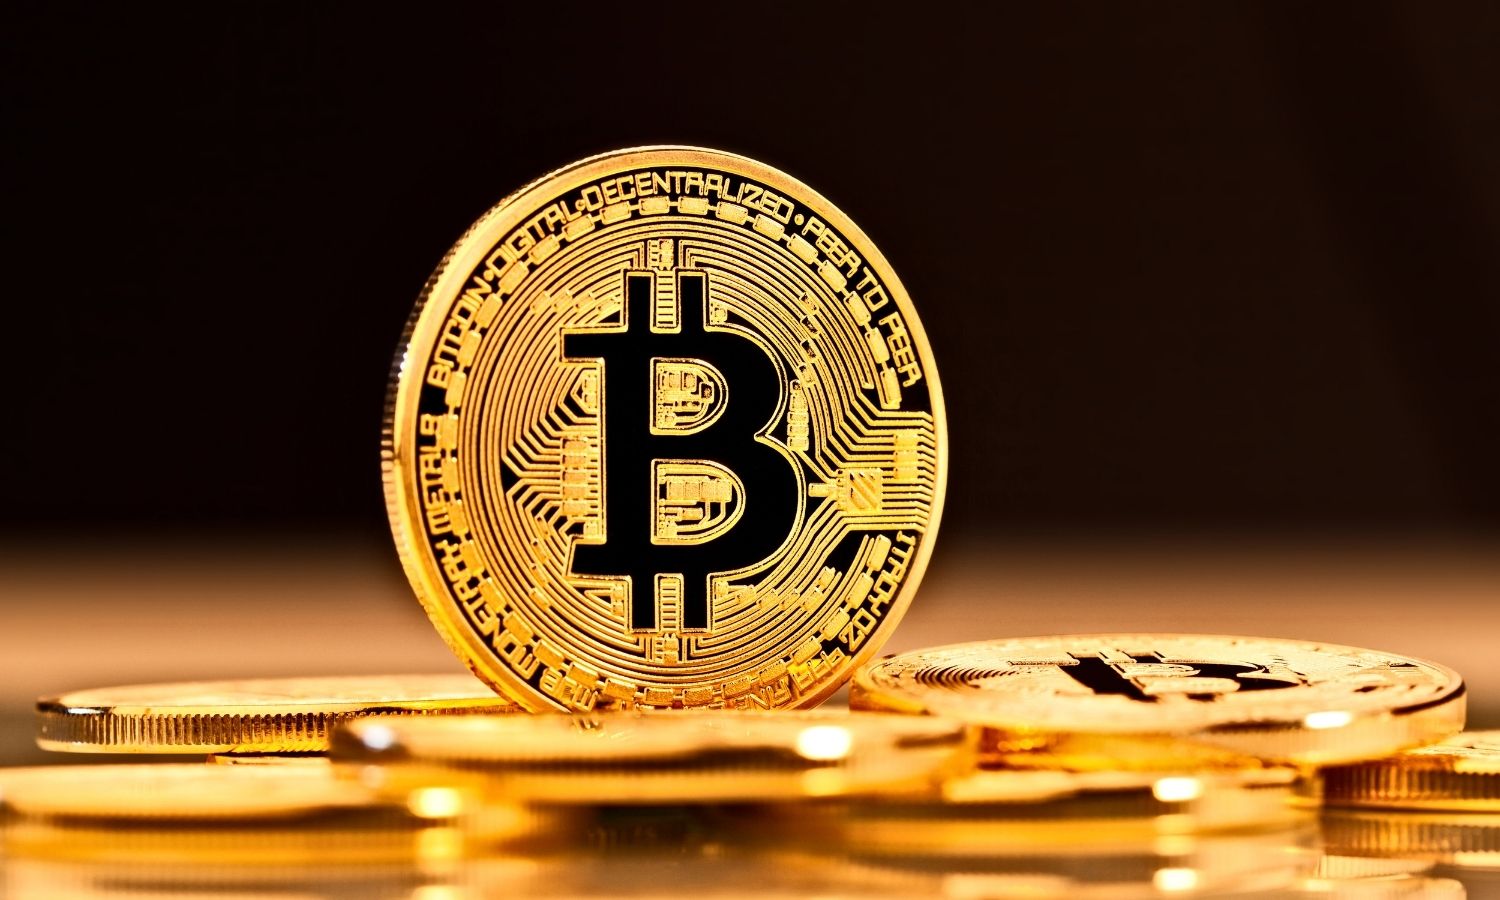 Expectations of Bitcoin rising to 250,000 after the halving: How does it move prices? 36452